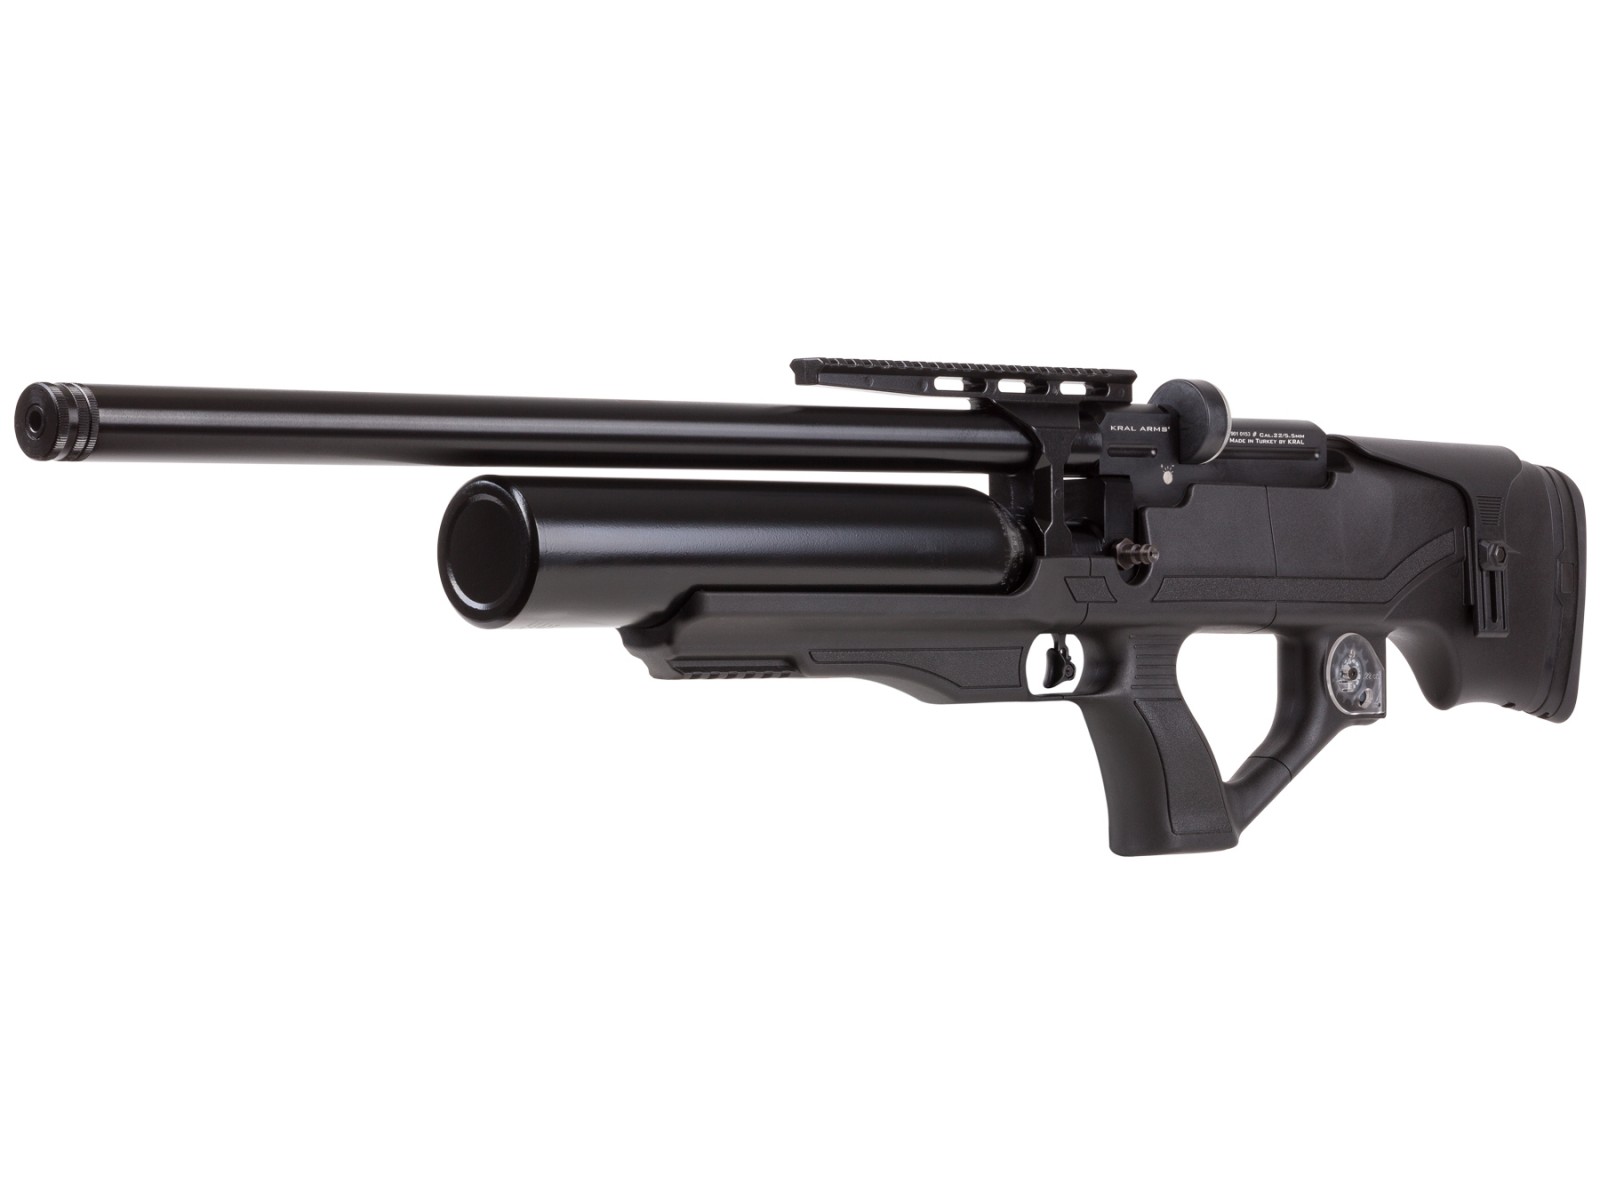 Kral Puncher Knight S PCP Air Rifle, Synthetic Stock